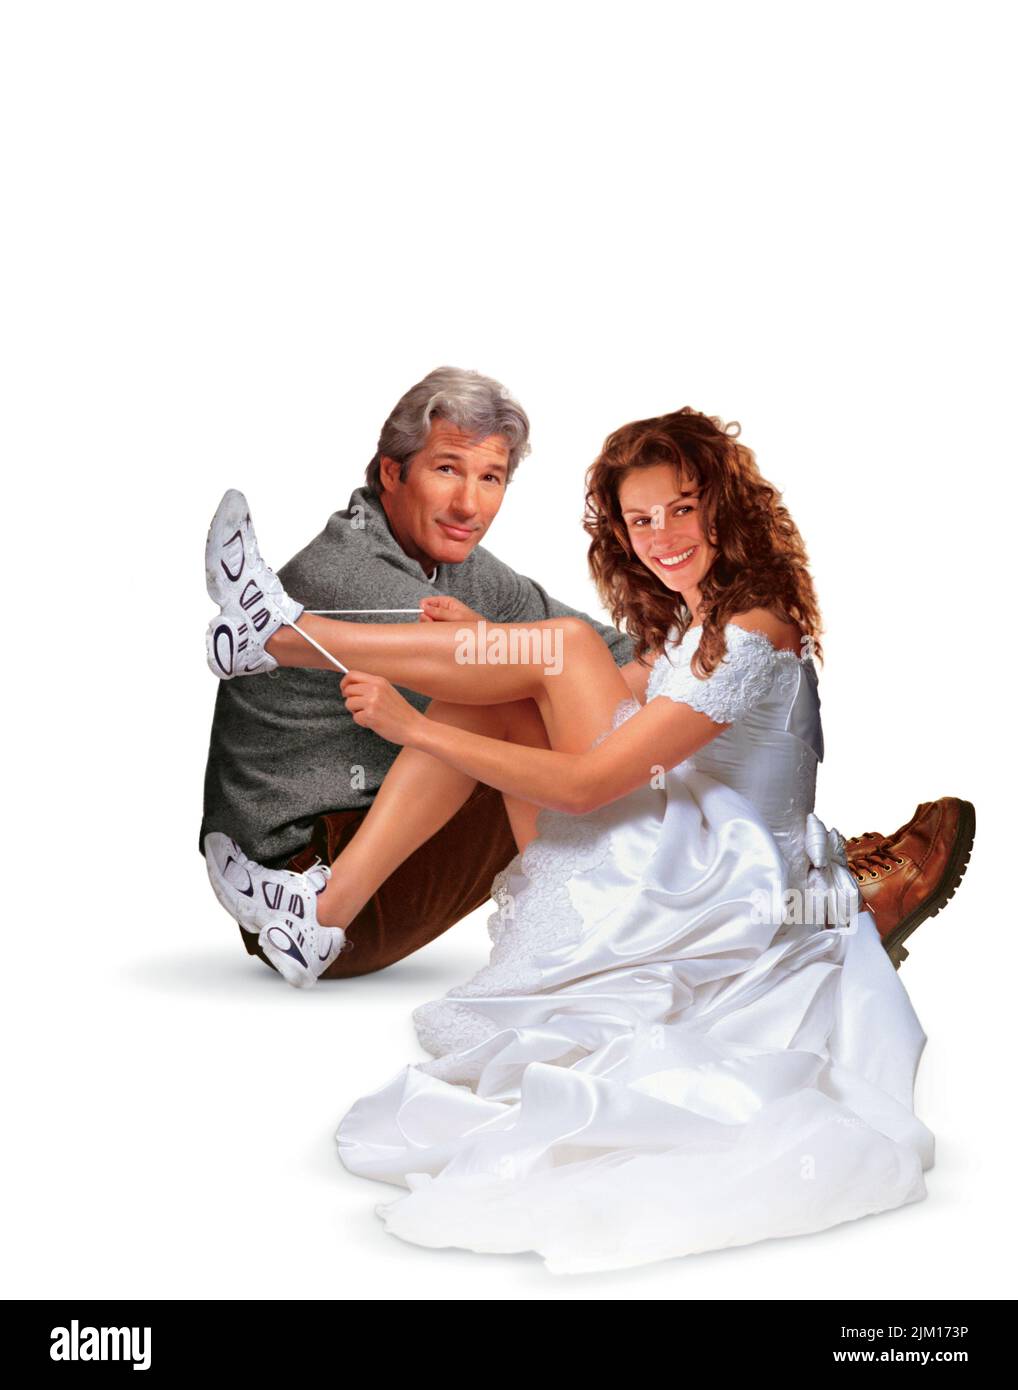 JULIA ROBERTS and RICHARD GERE in RUNAWAY BRIDE (1999), directed by GARRY MARSHALL. Credit: TOUCHSTONE PICTURES/PARAMOUNT PICTURES / Album Stock Photo